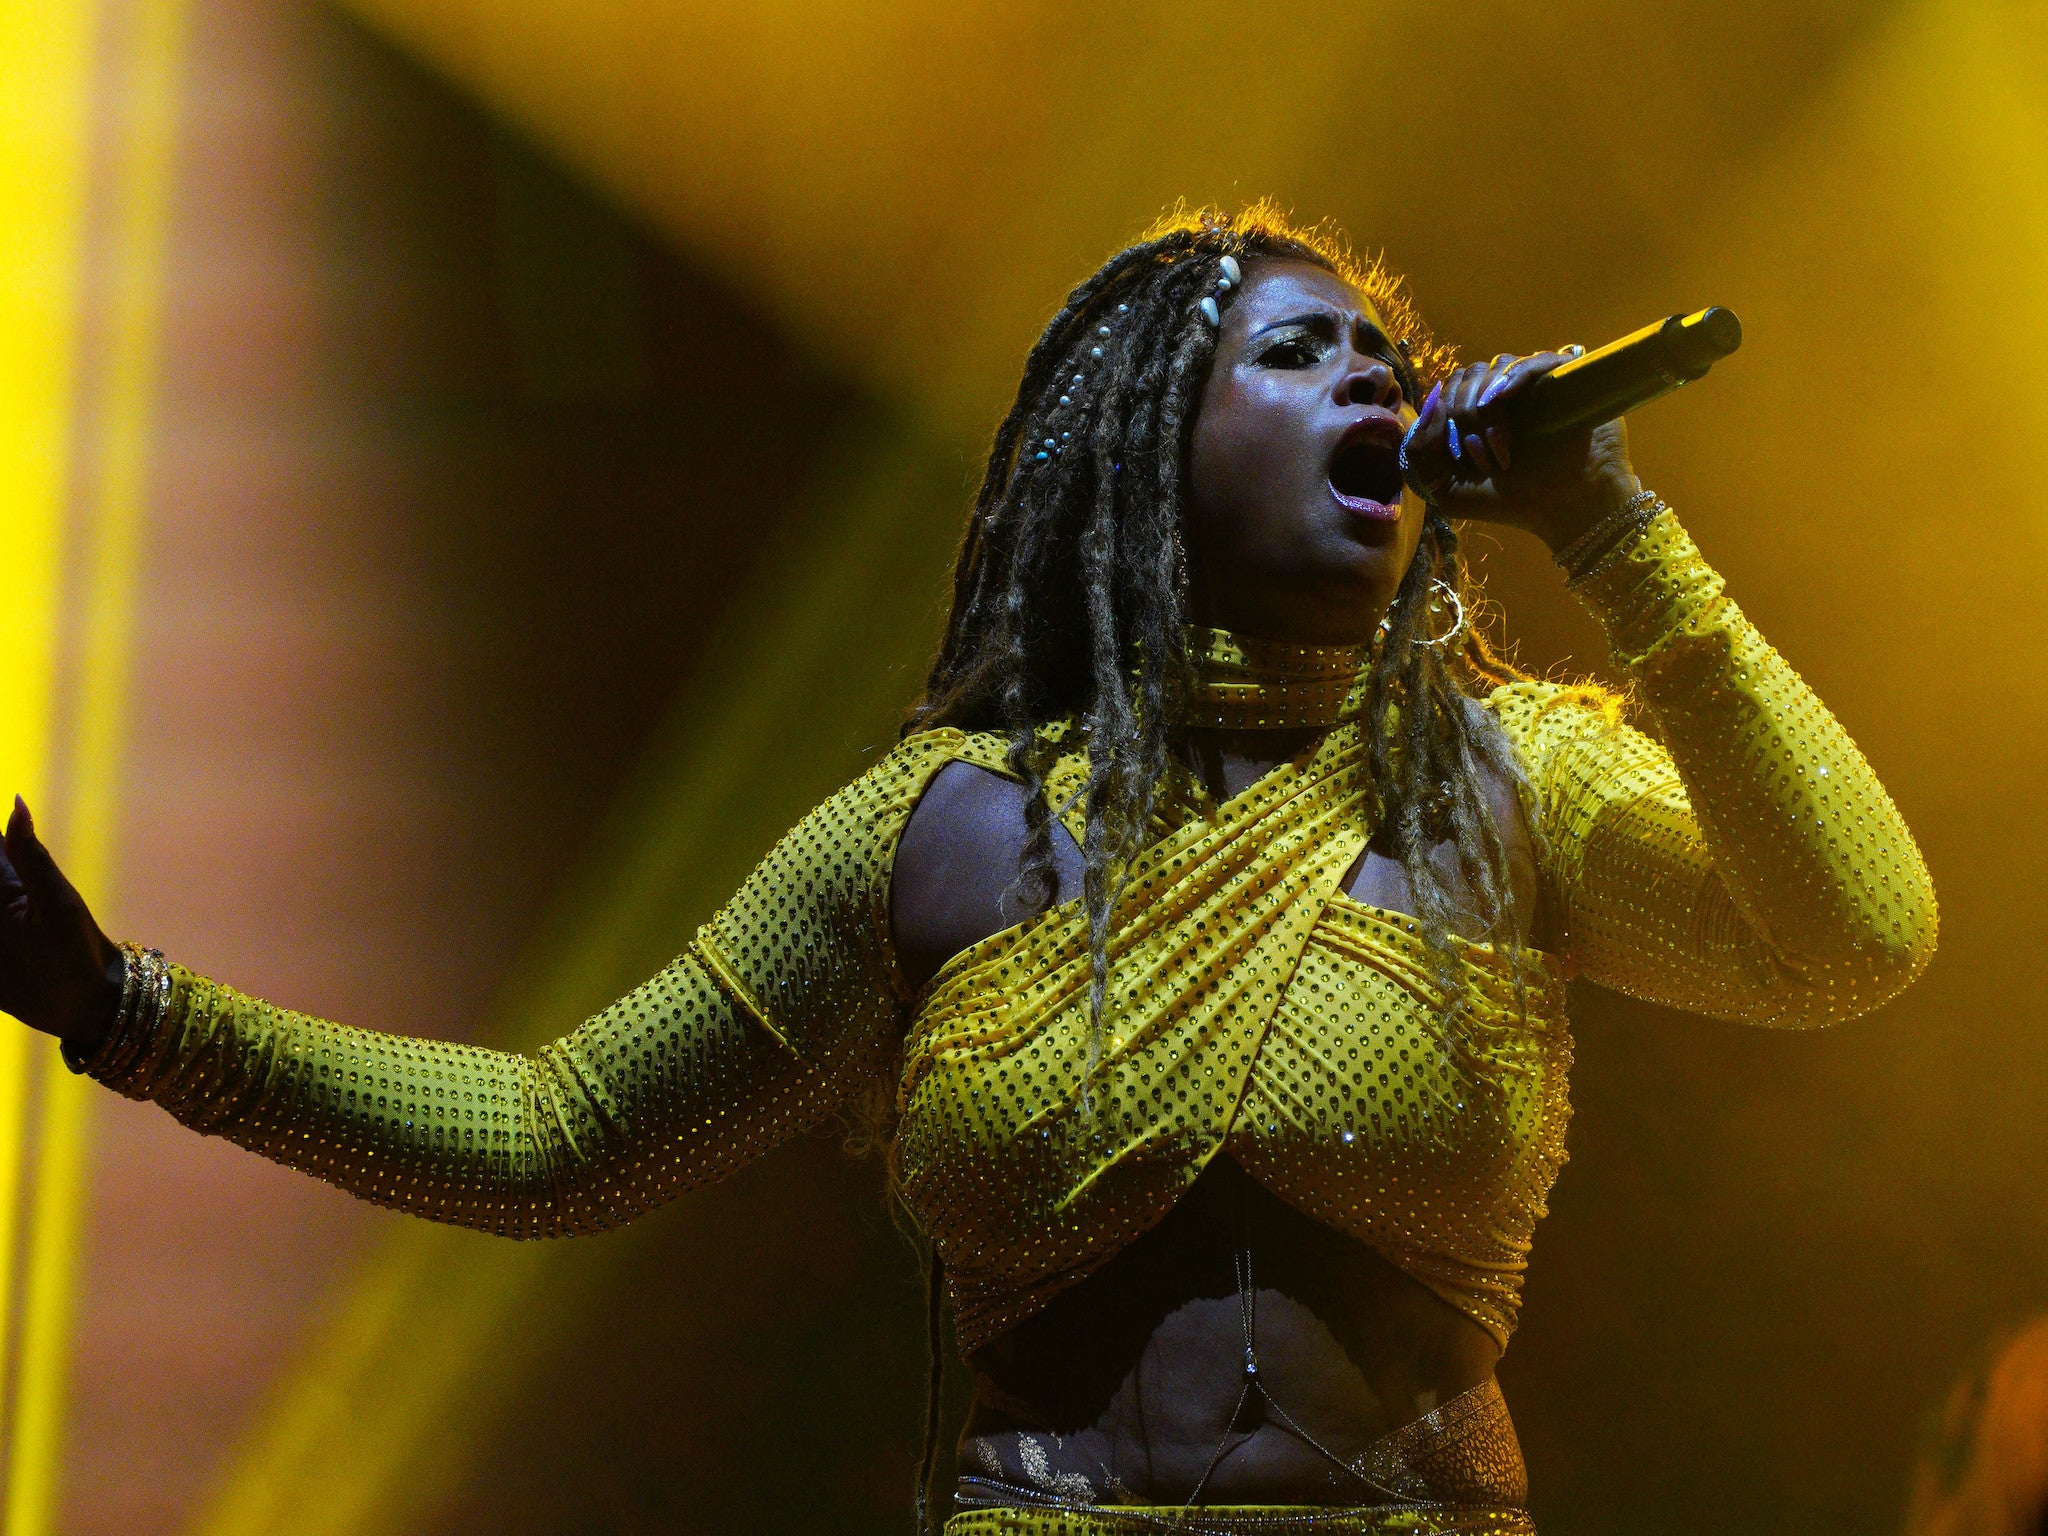 Kelis came to party, dressed in a sparkly yellow two-piece for her first headline show